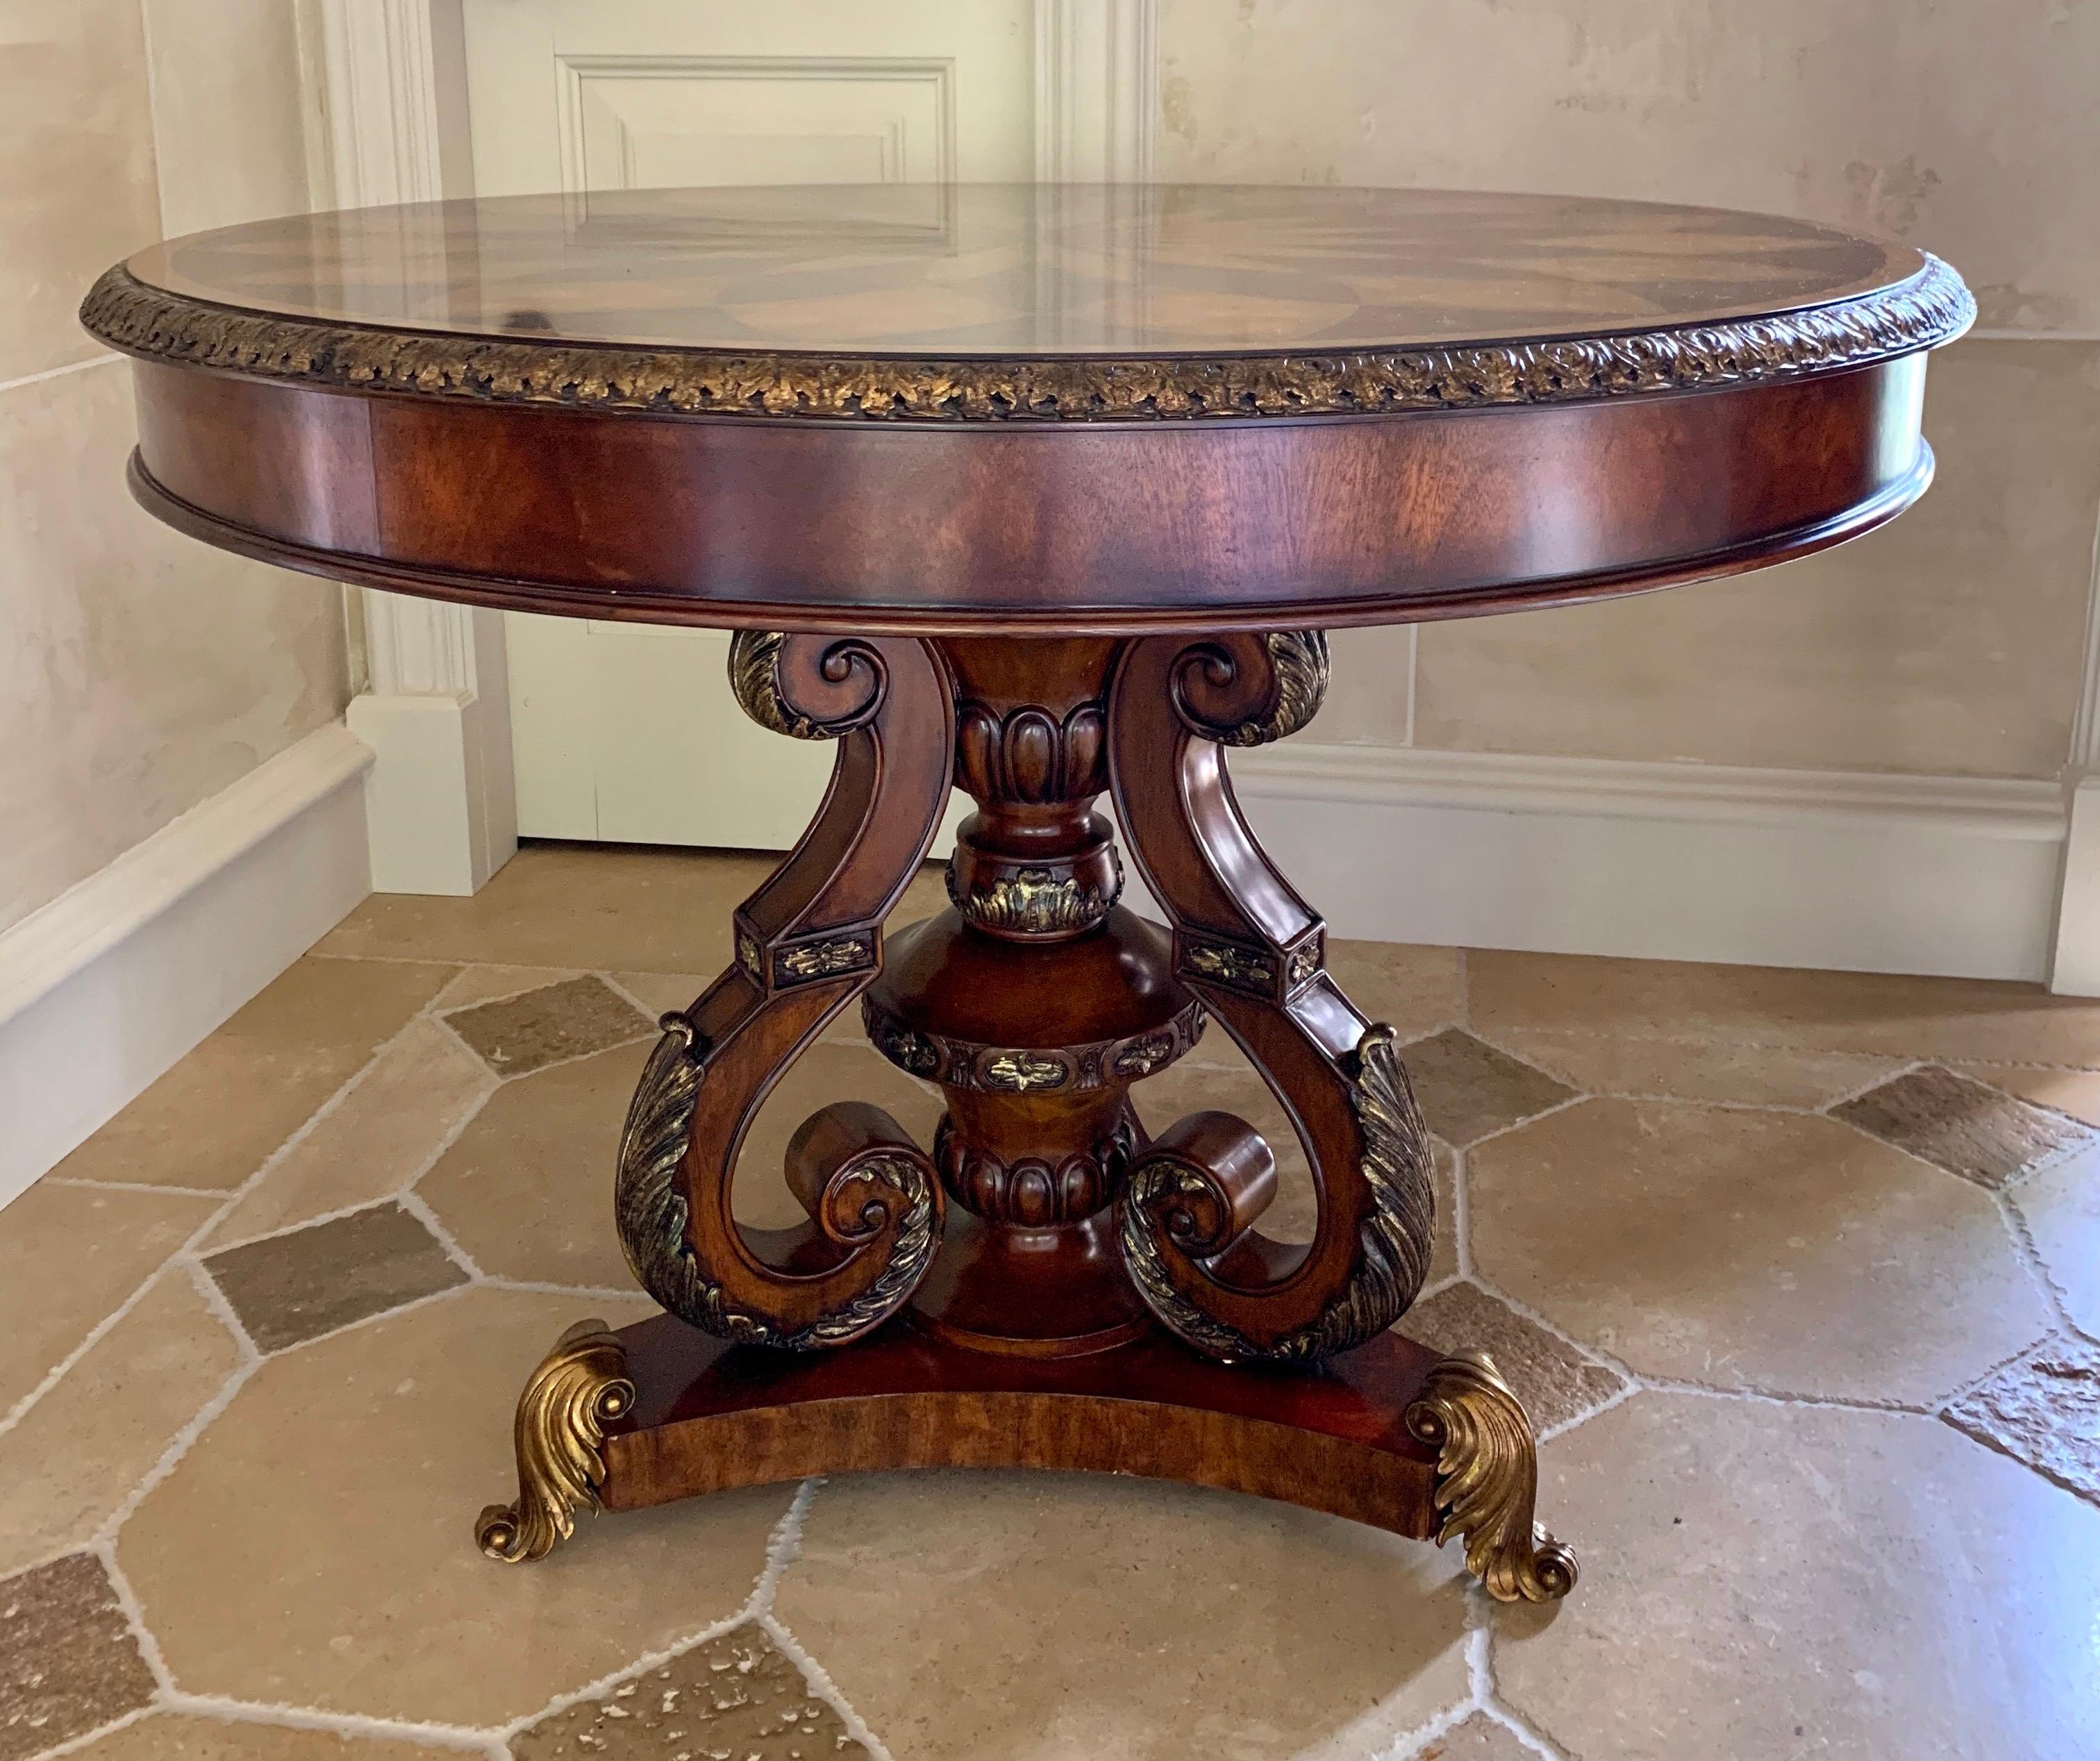 Exquisite Maitland Smith round center pedestal table features a marquetry star pattern on top and carved gold giltwood accents and border.